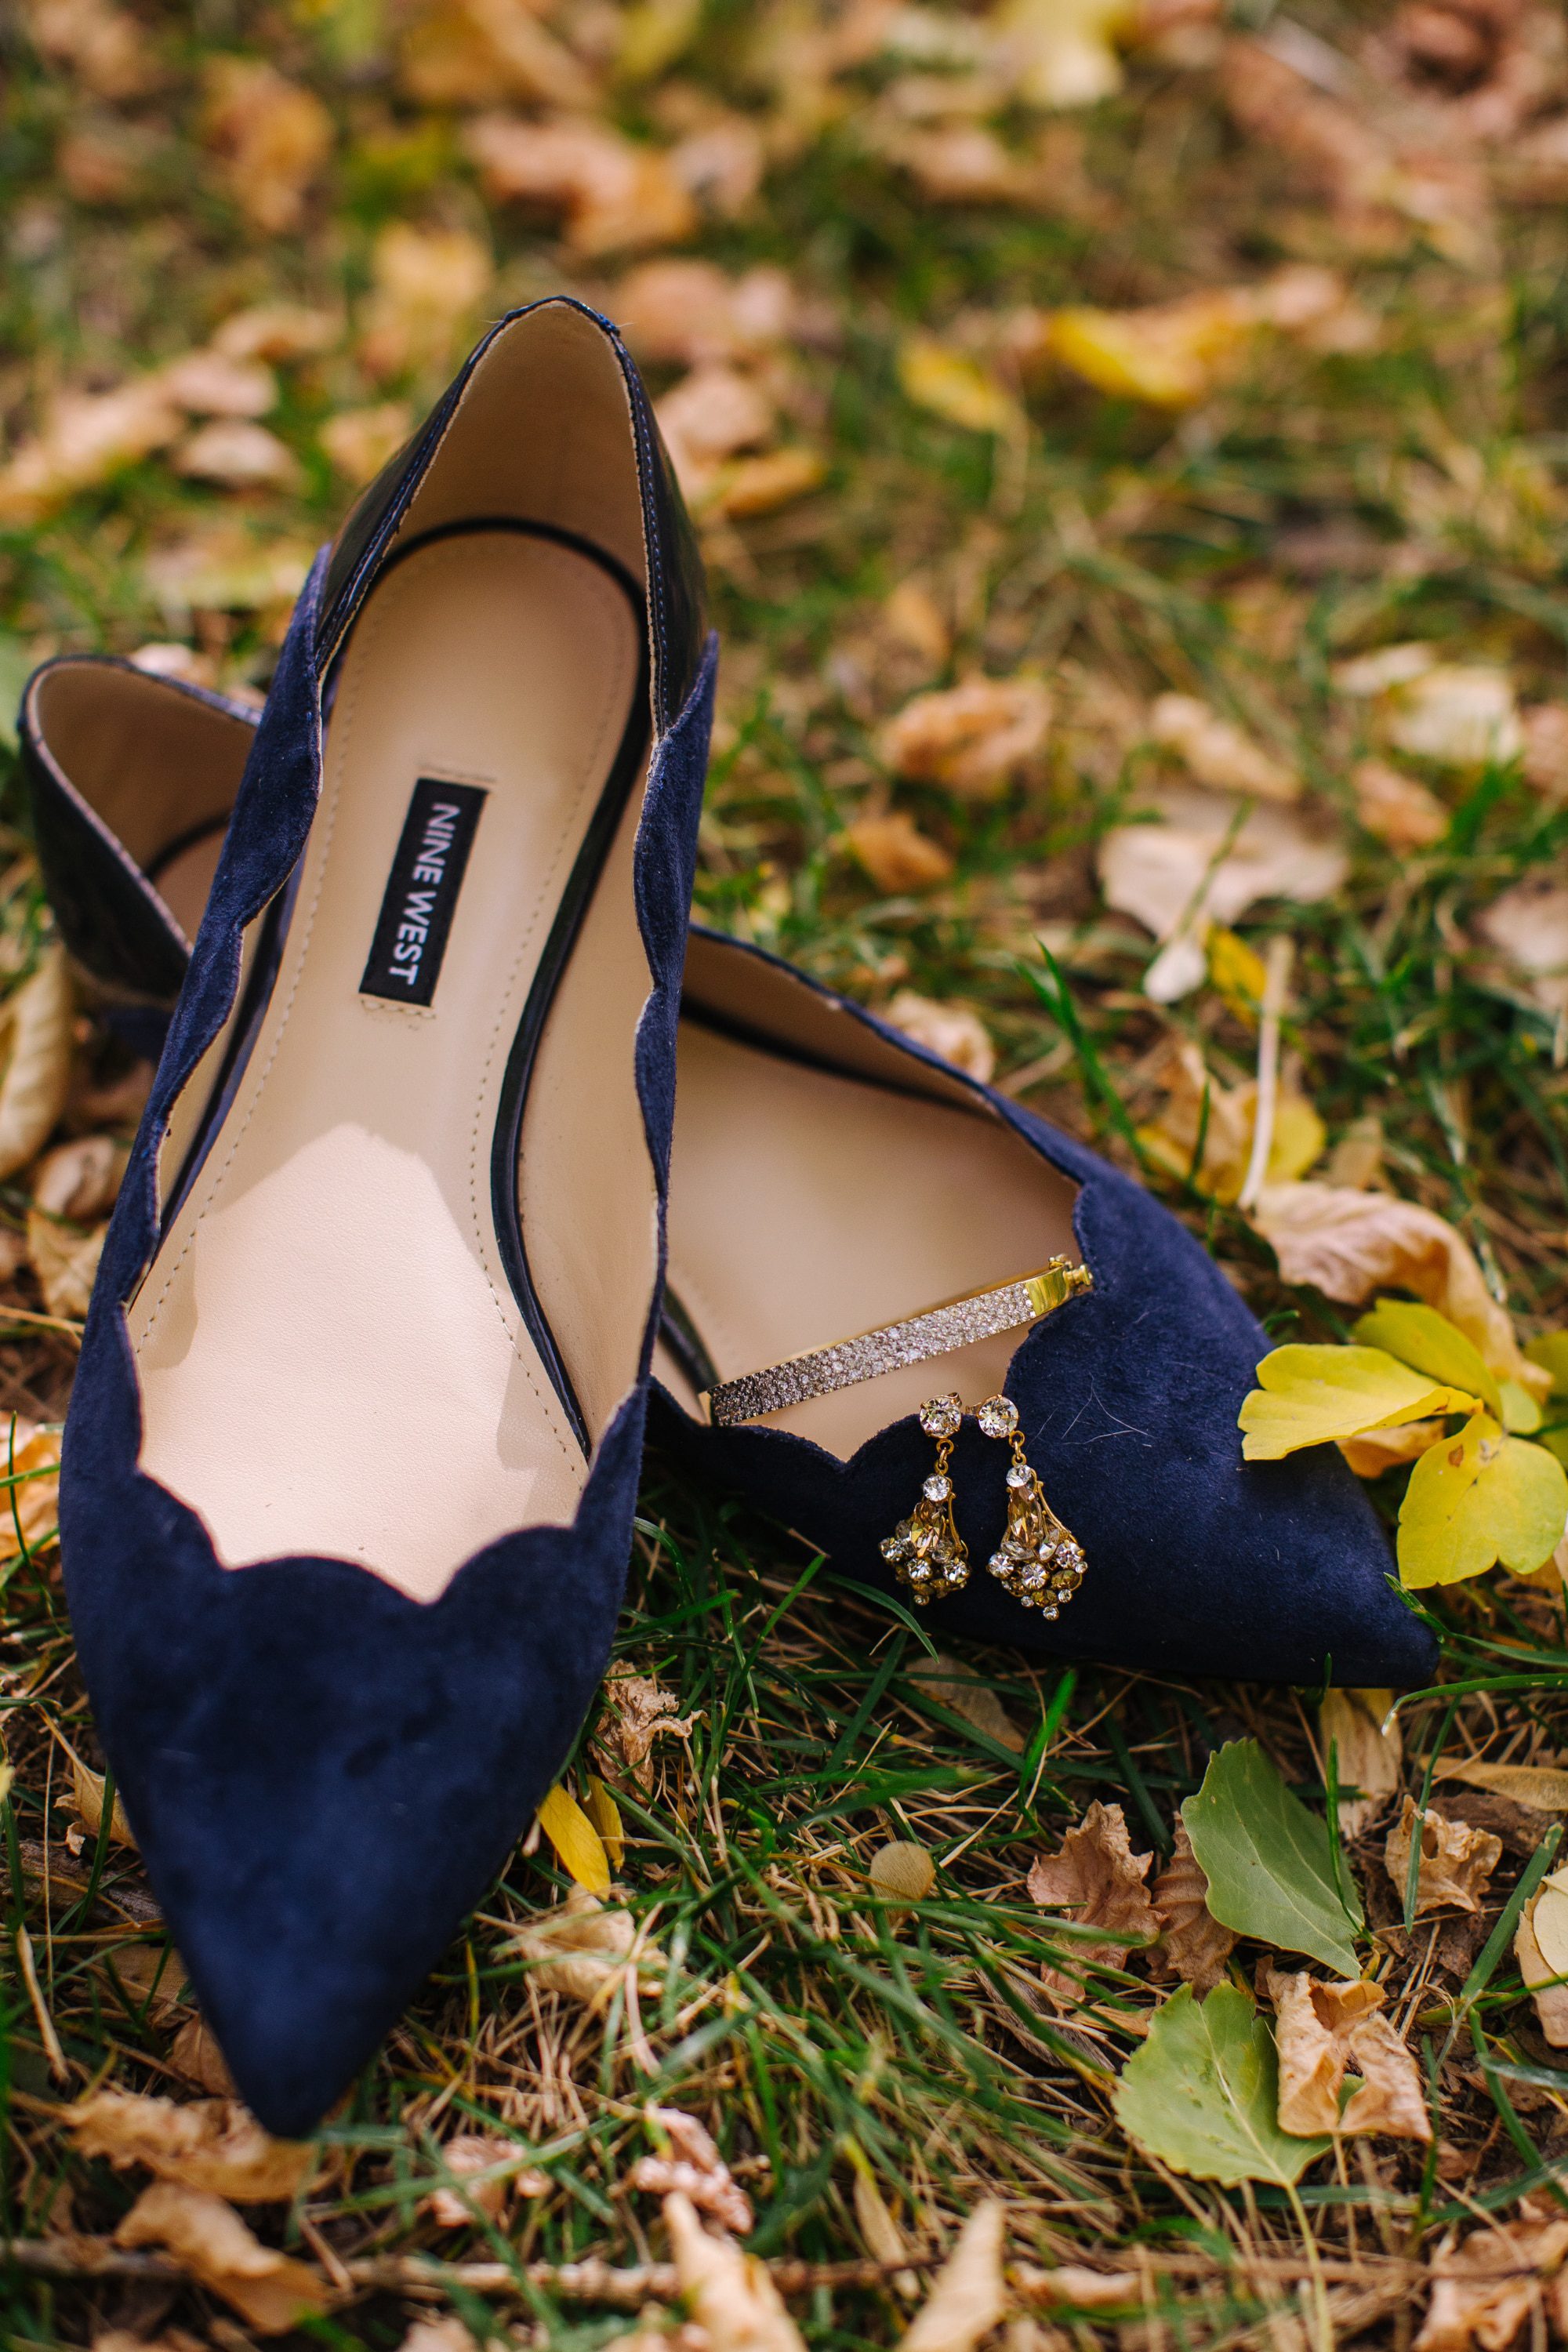 nine west wedding shoes, gold bridal jewelry, what to use as something blue, bridal details, simple bridal jewelry, blue shoes bride, bride shoes, something blue bride, detail shot, fall wedding, colorado fall wedding